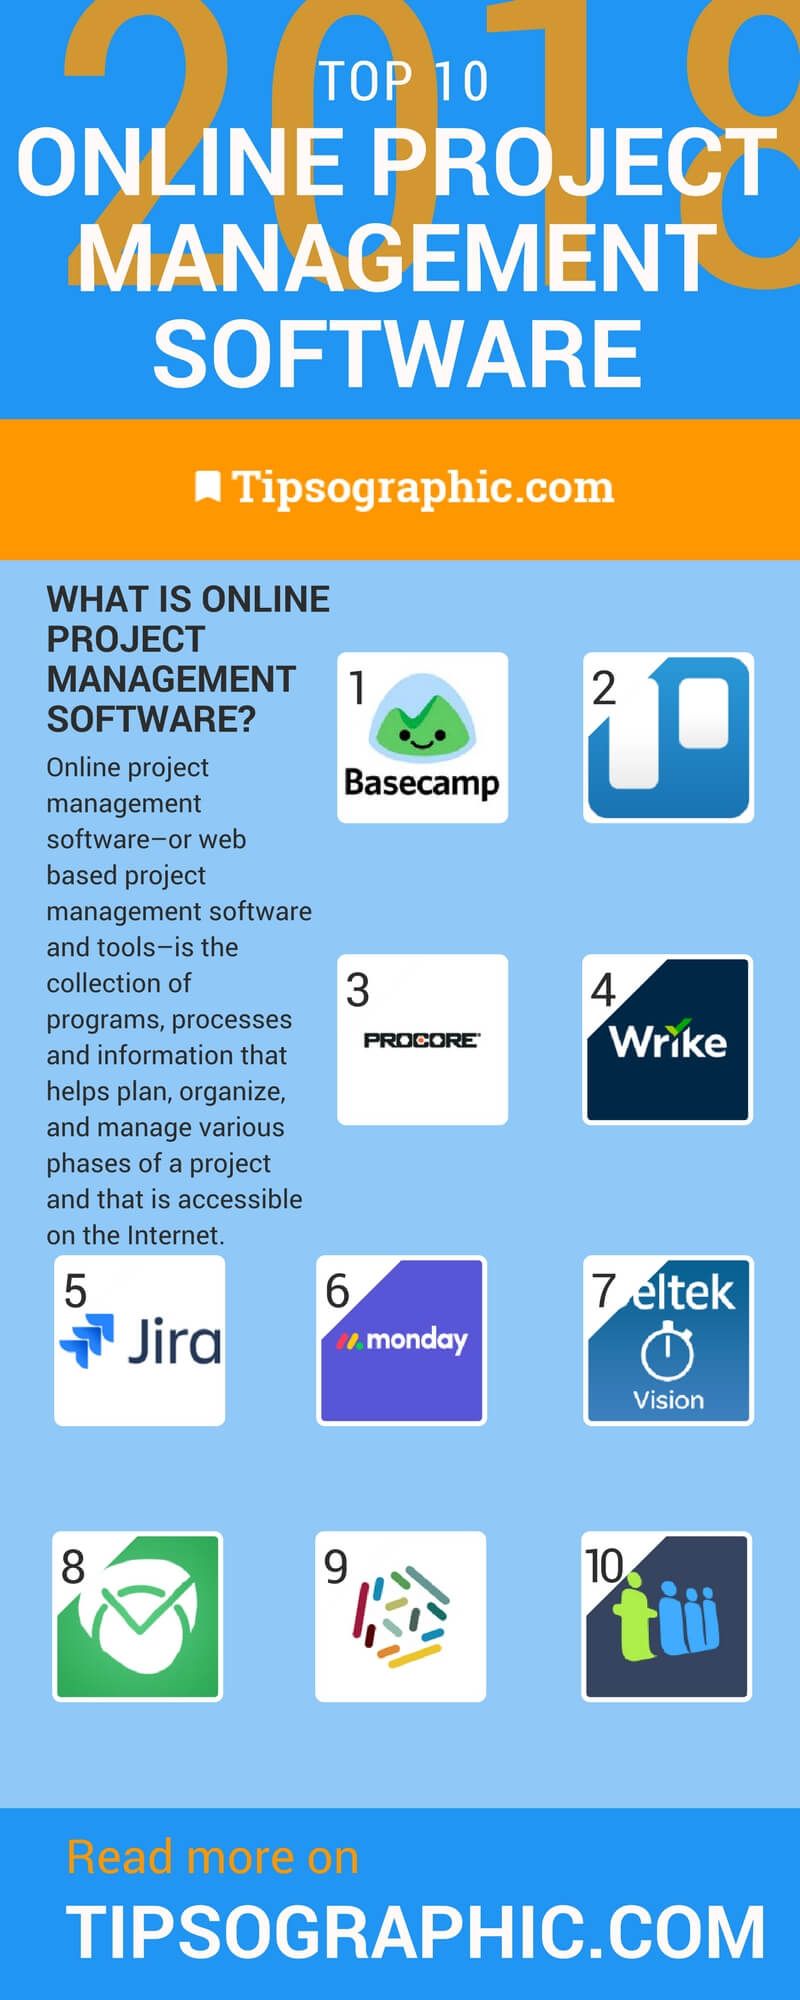 Image titled online project management software 2018 best systems